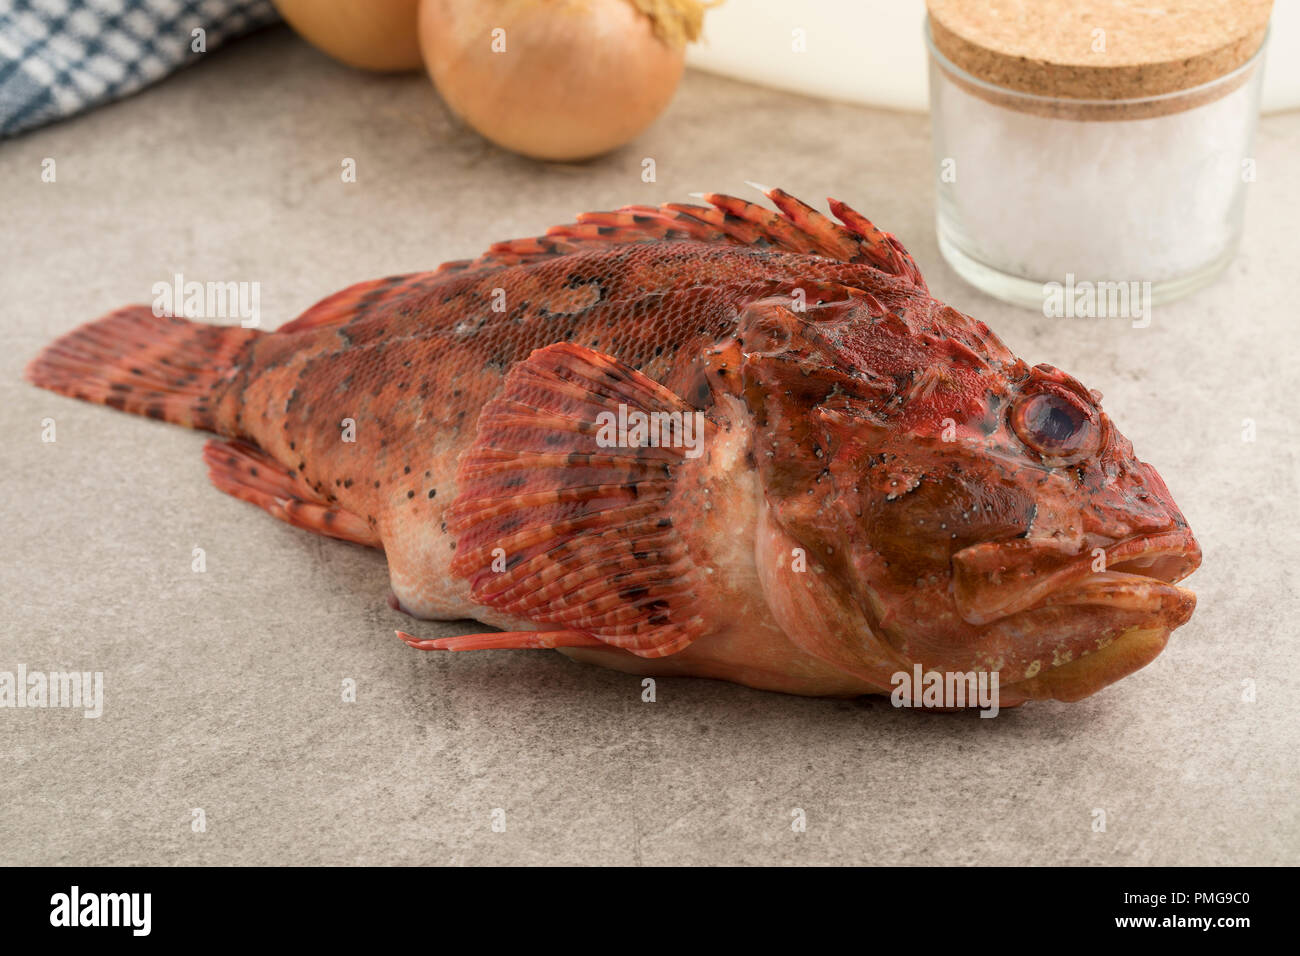 Single fresh raw red scorpionfish ready to cook Stock Photo